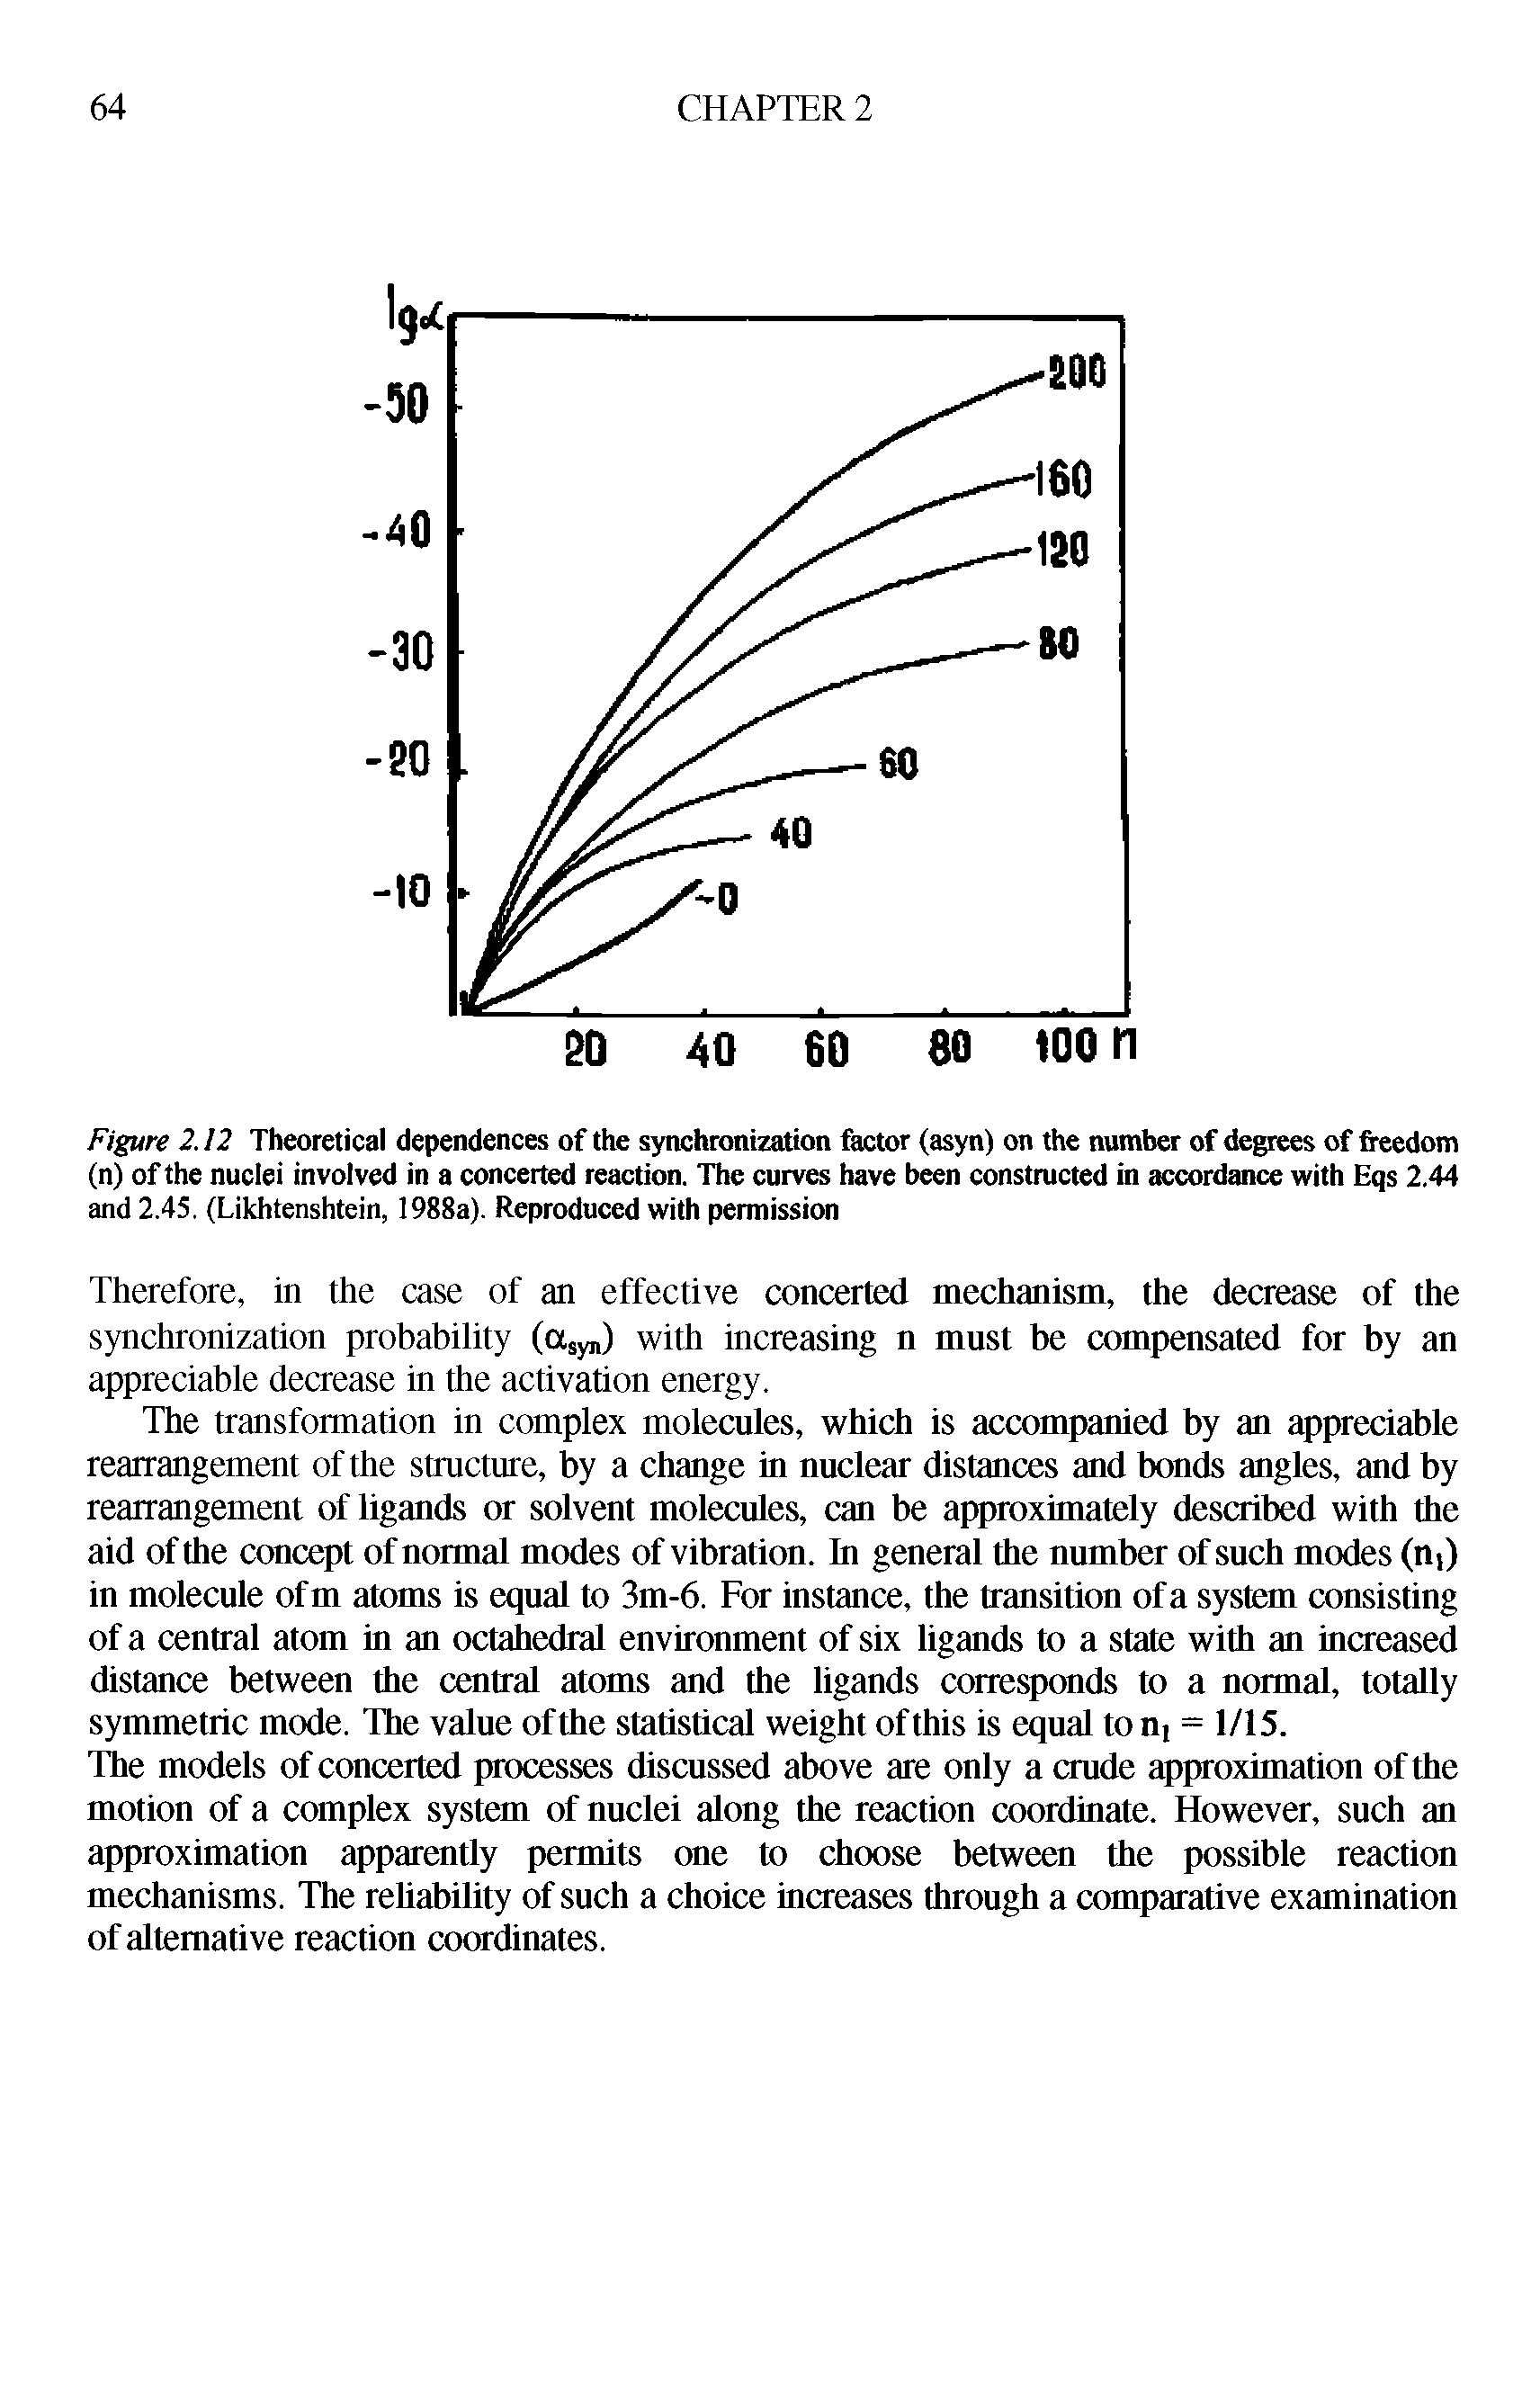 Figure 2.12 Theoretical dependences of the synchronization factor (asyn) on the number of degrees of freedom (n) of the nuclei involved in a concerted reaction. The curves have been constructed in accordance with Eqs 2.44 and 2.45. (Likhtenshtein, 1988a). Reproduced with permission...